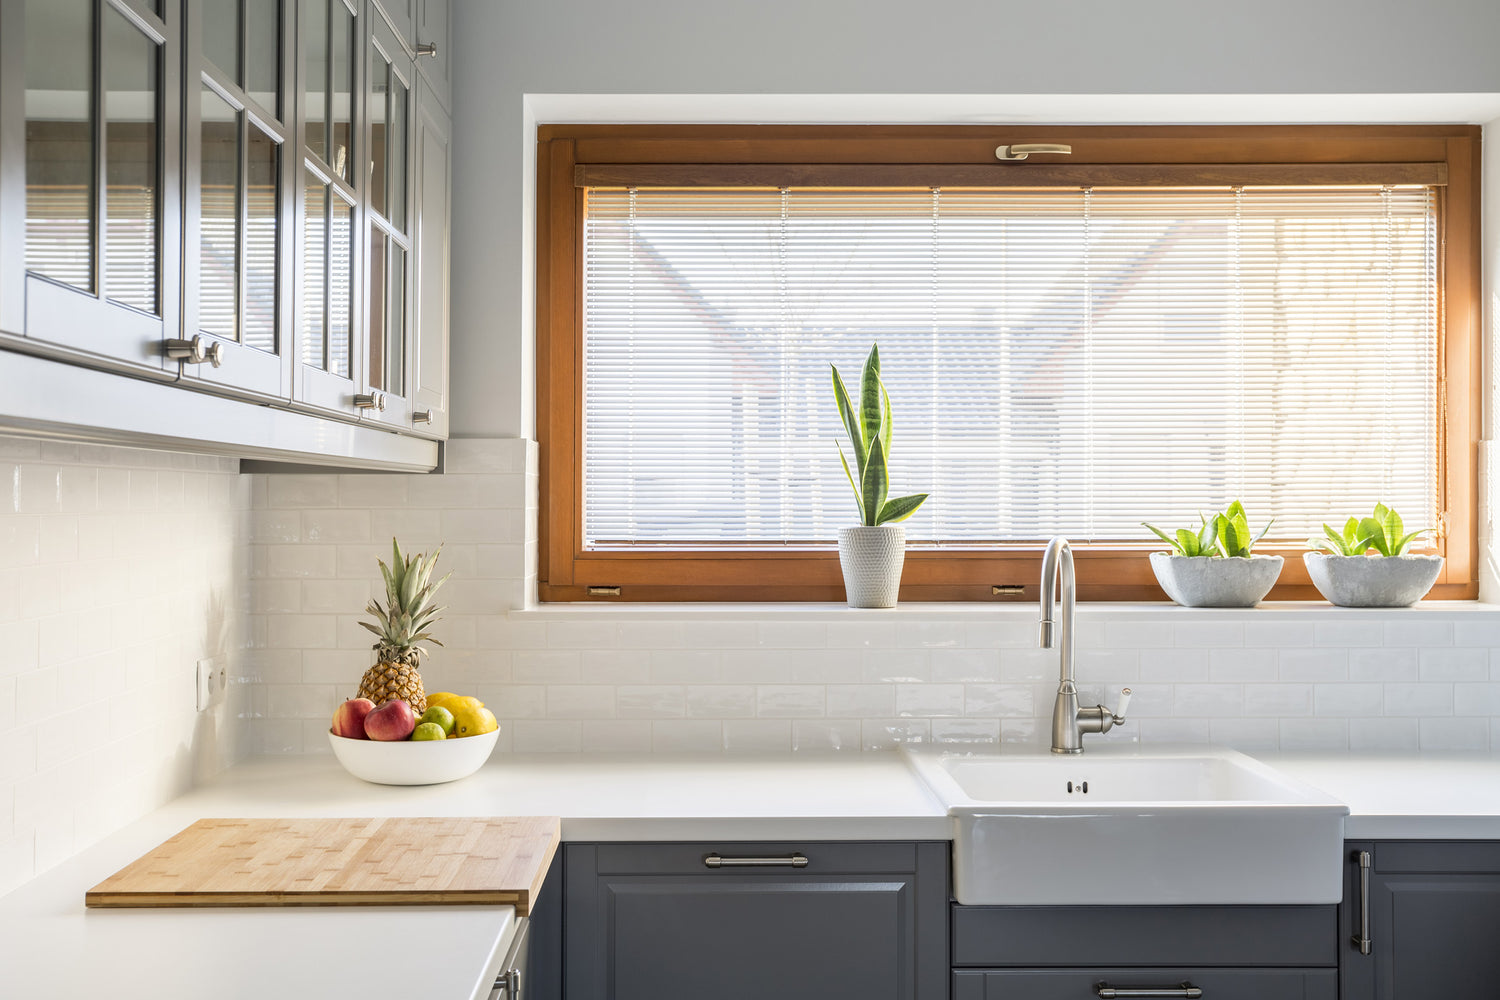 modern kitchen with plants and fruit sitting on counter and window sill